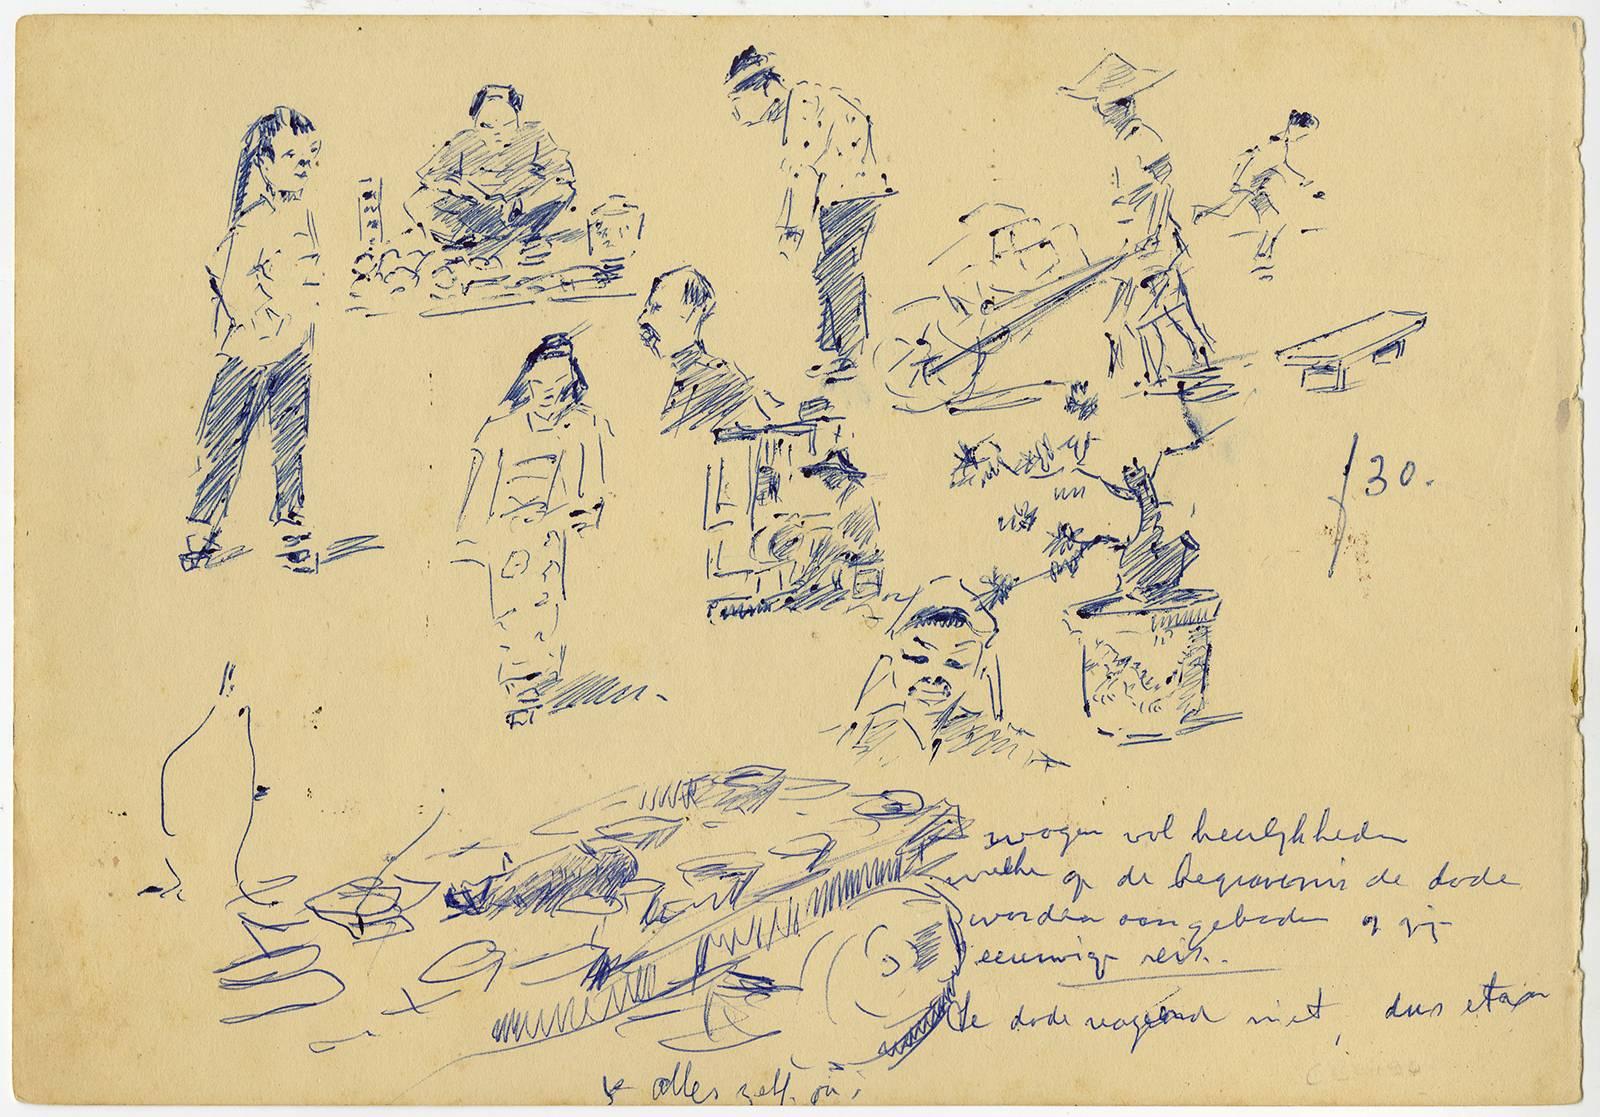 Felt-tip pen and Watercolor on wove paper.

Chinese begrafenis. Singapoer. 27-2-67.'' - Three watercolours of various features of a Chinese funeral in Singapore. One of the drawings shows mourners near a coffin. The second shows musicians preceding